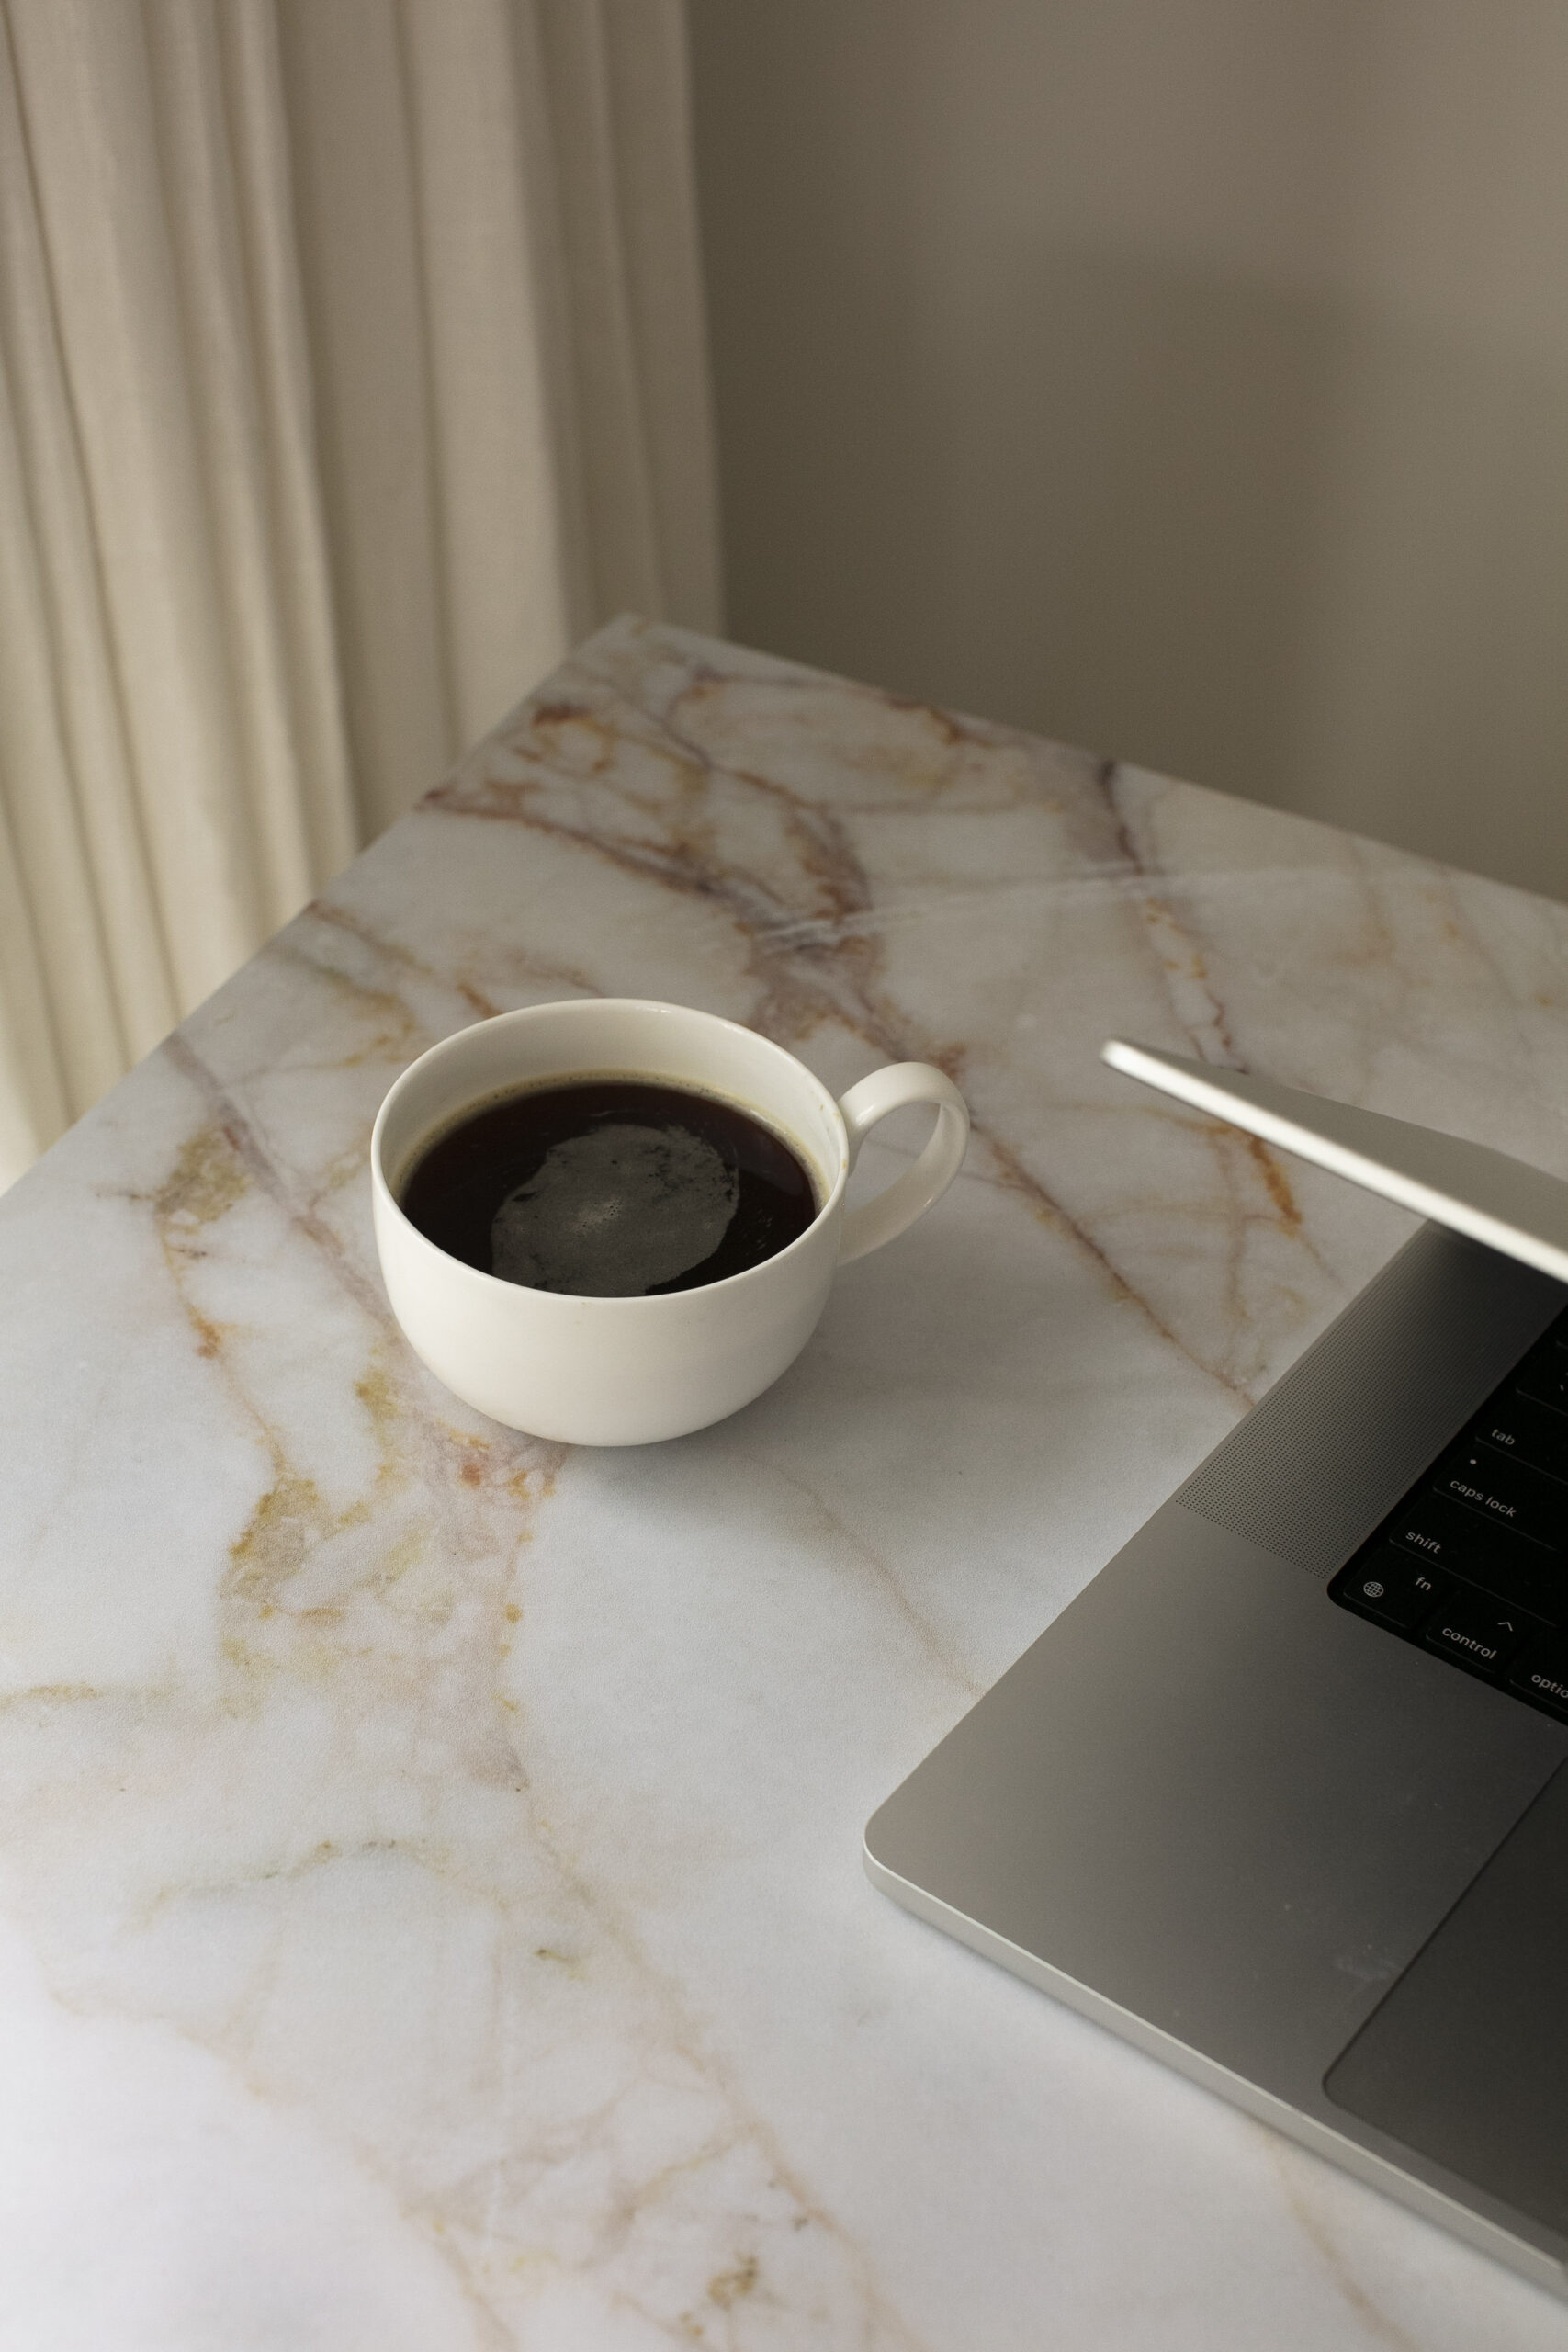 Laptop and white coffee mug on a white and tan marble table